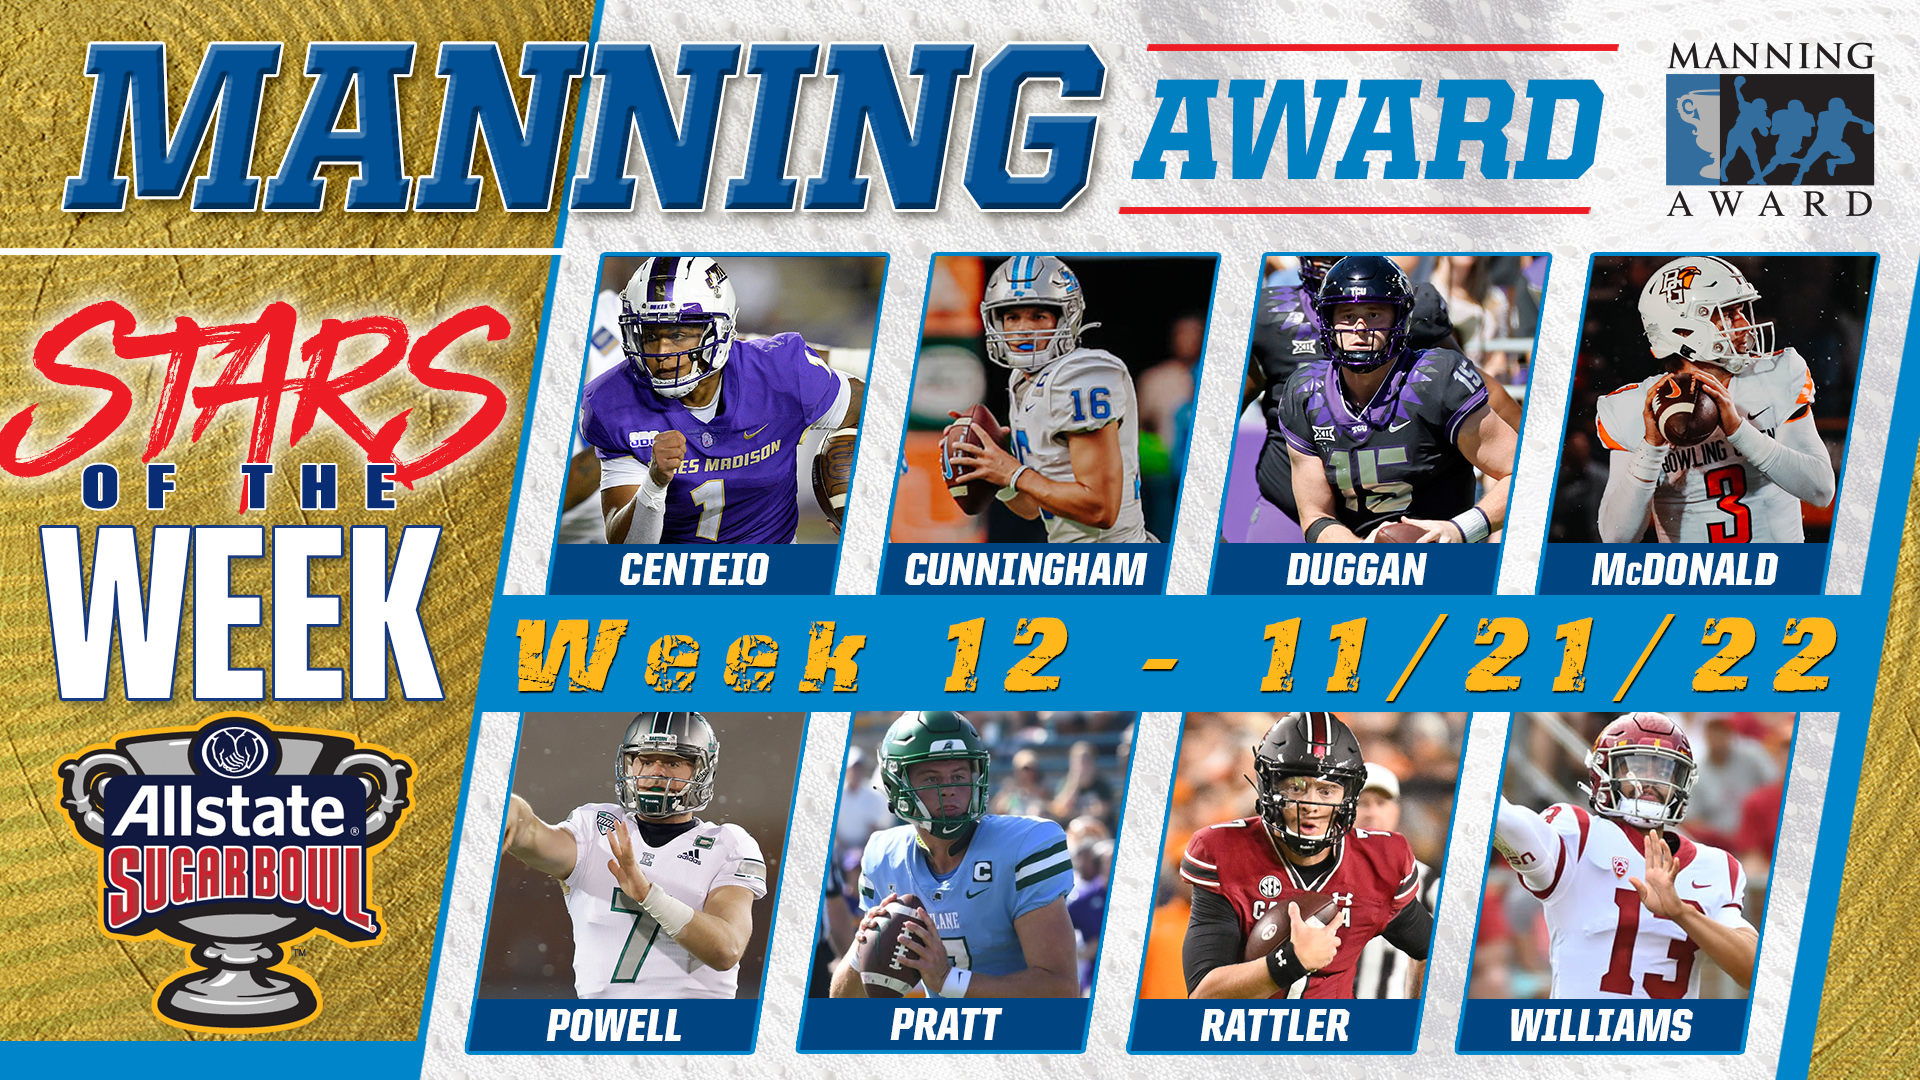 Rattler Named to Manning Award’s Stars of the Week List